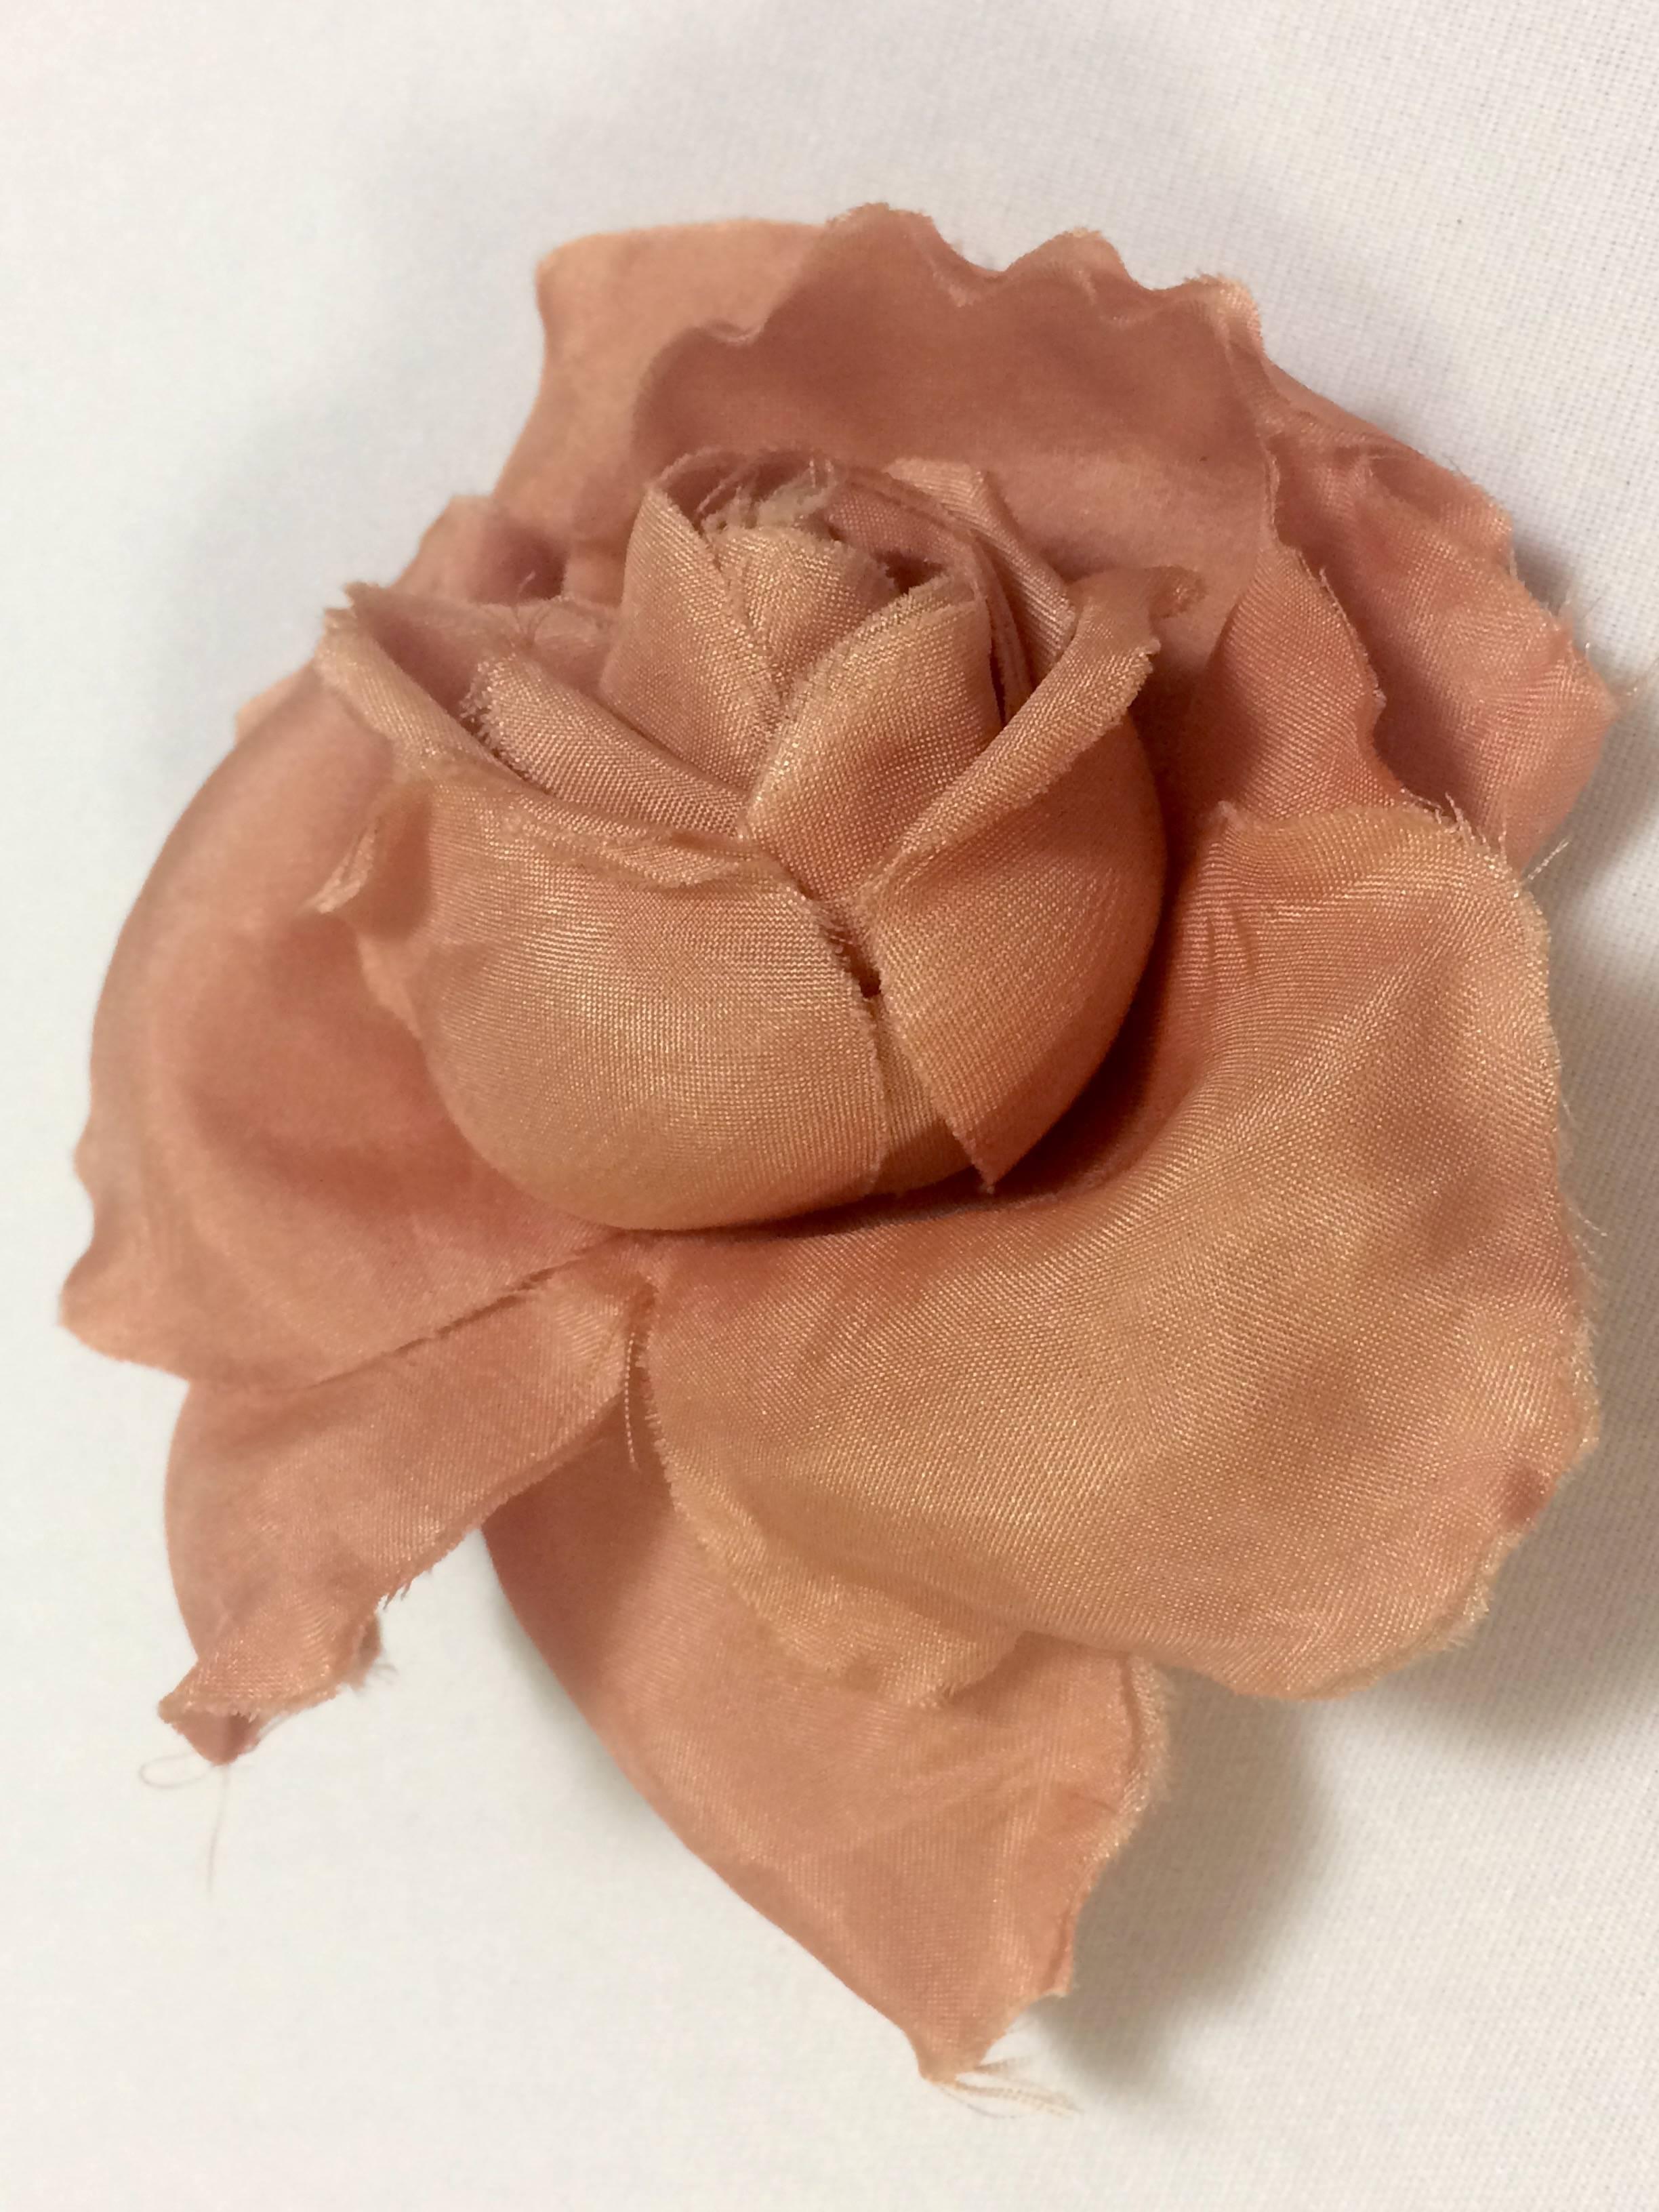 1990s. Vintage CHANEL salmon pink rose, flower silk brooch. Very elegant accent on your outfit. Classic jewelry for Spring and Summer.

Introducing an elegant brooch from CHANEL back in the 90's. Great gift idea. Free gift wrapping. 
Beautiful silk